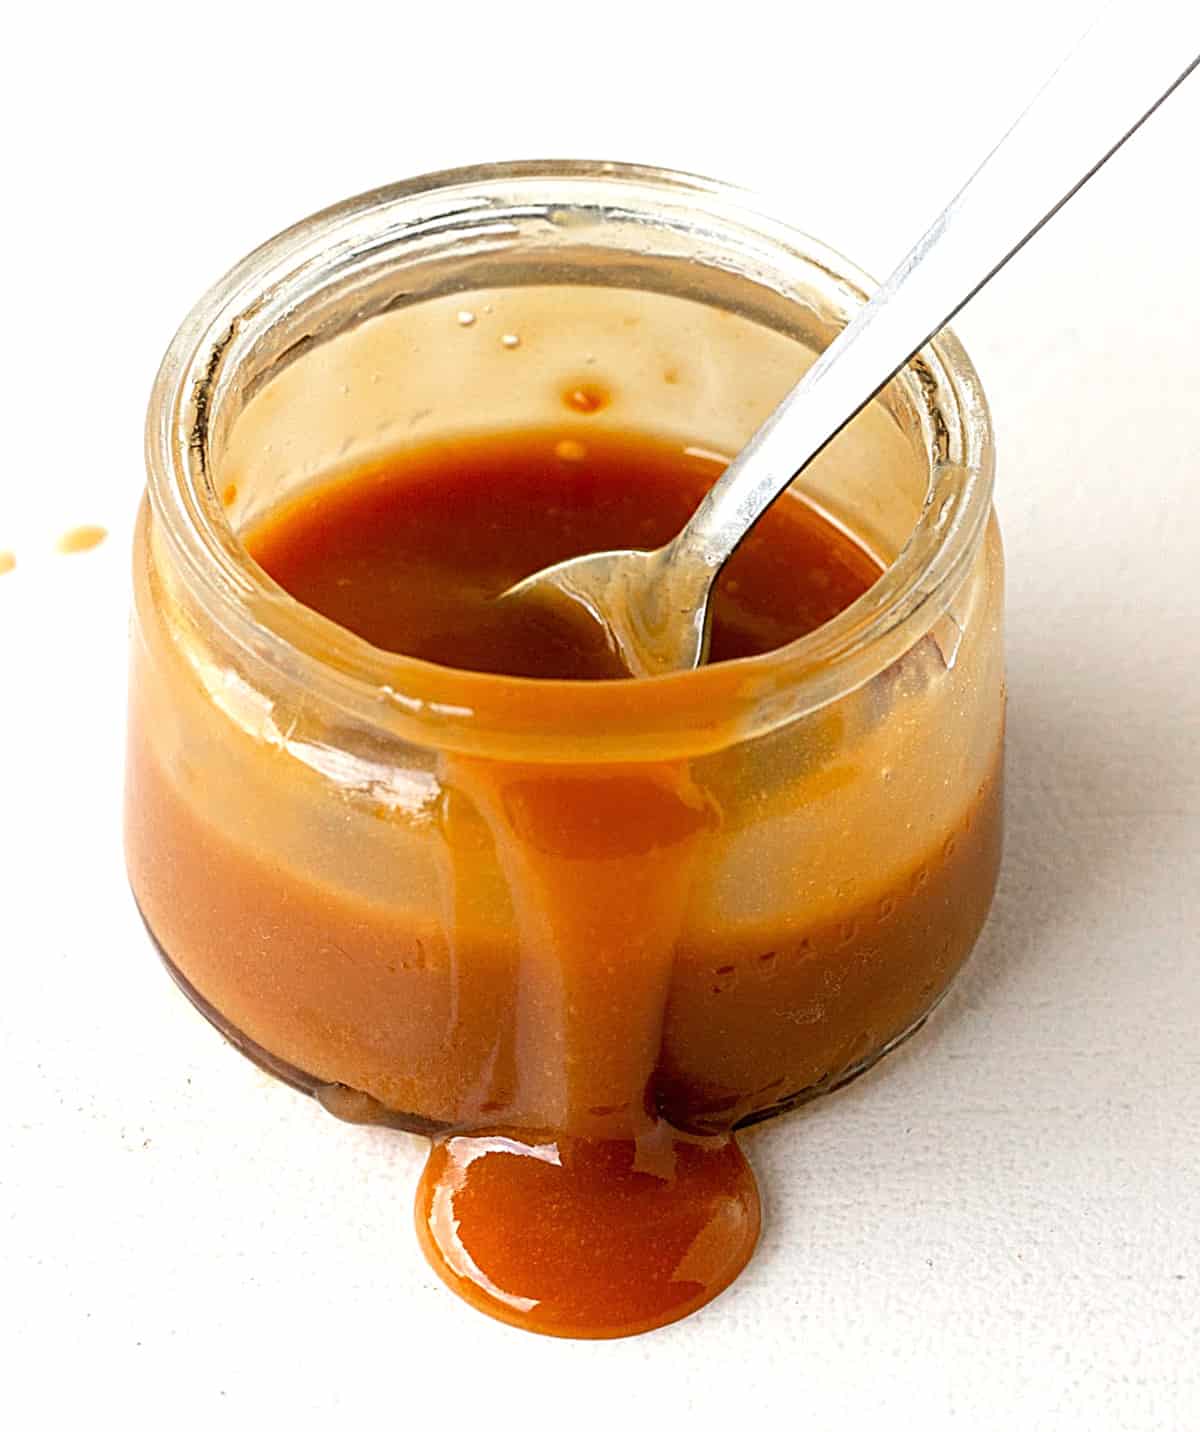 Glass jar with dripping caramel sauce, spoon inside, white background